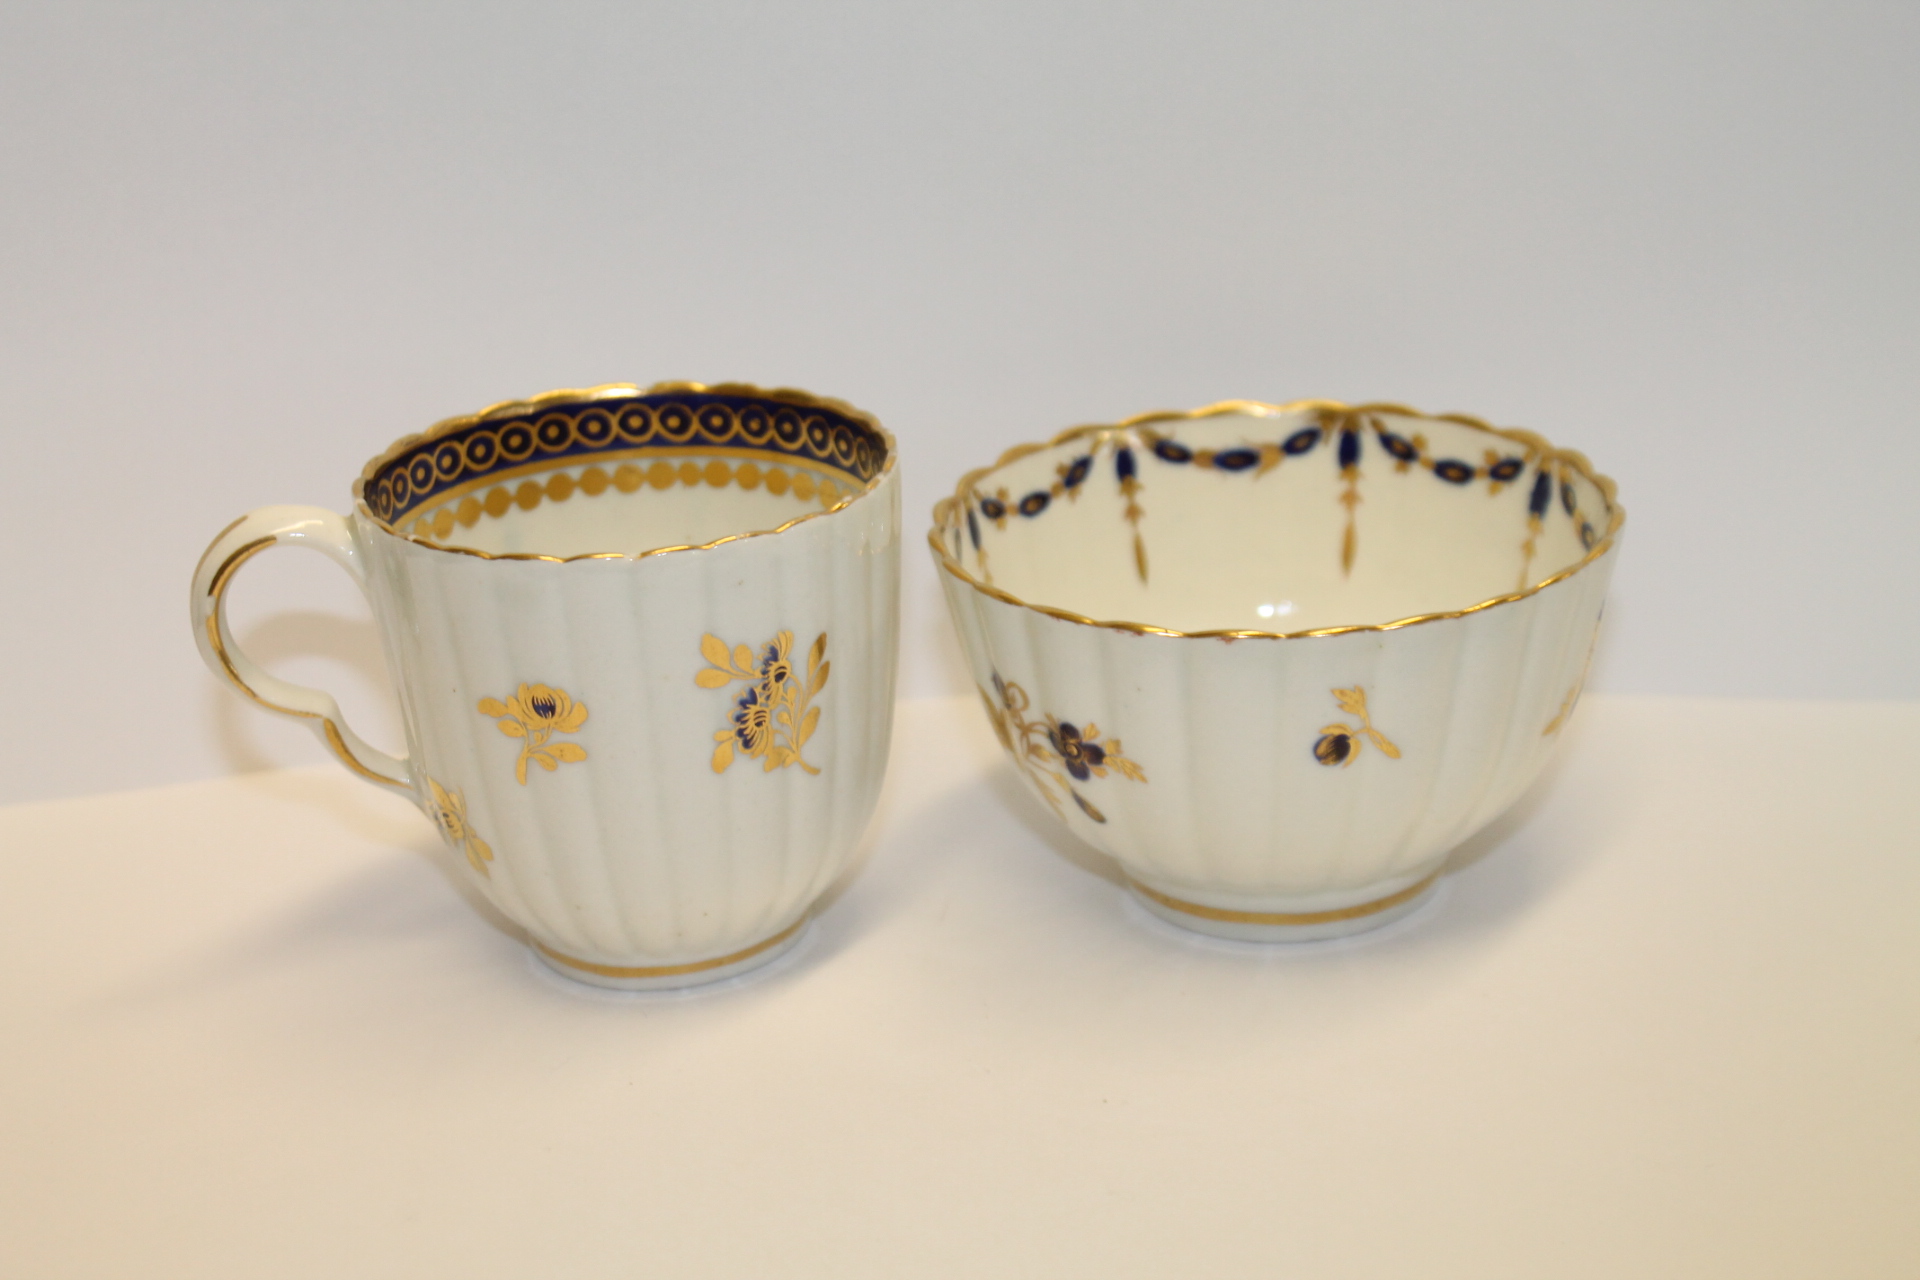 Caughley coffee cup of reeded form with gilt & blue band decoration & gilt & blue floral & foliate